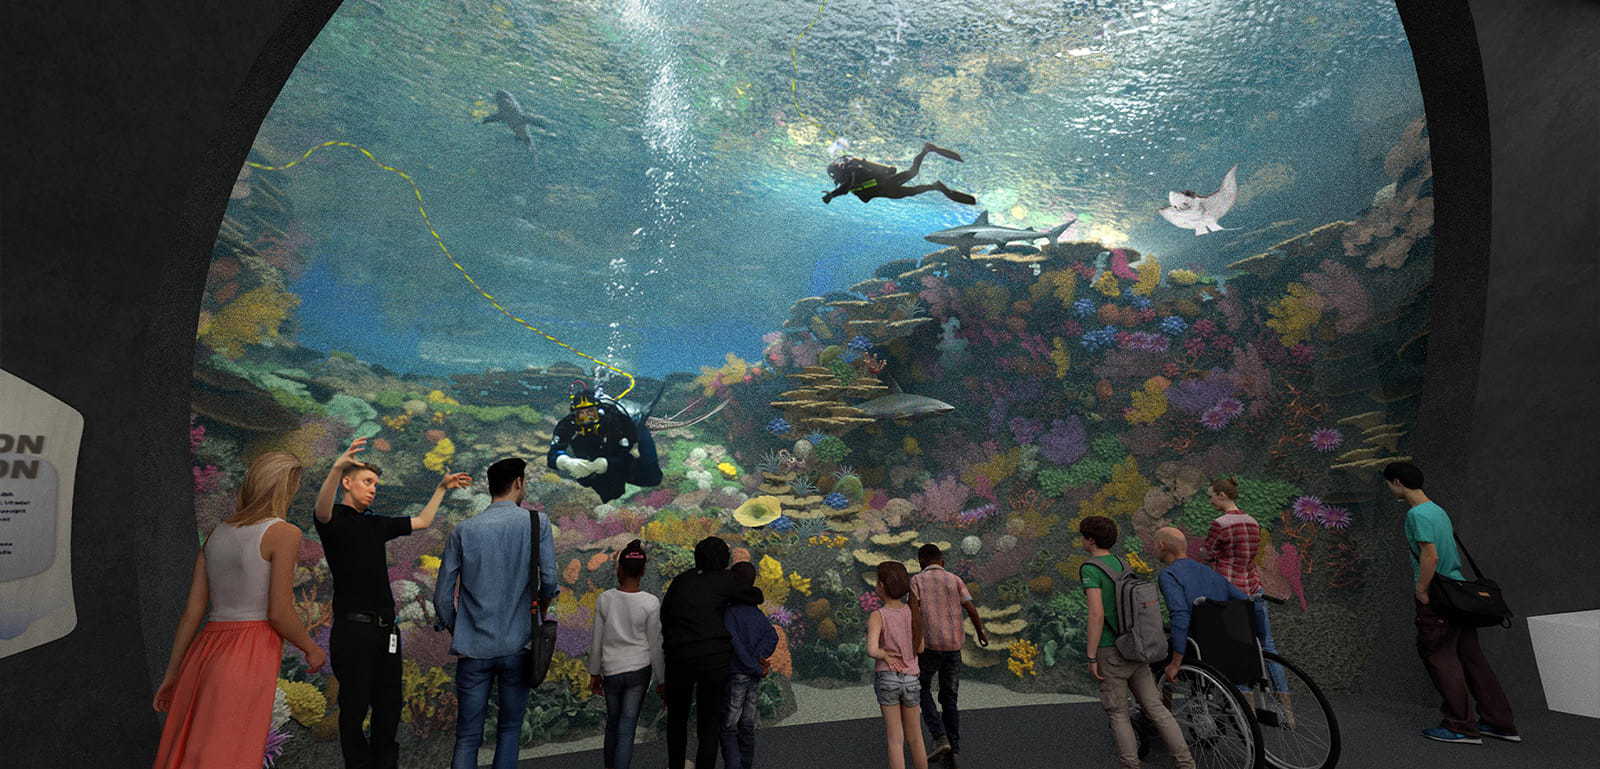 A rendering of the future The Reef exhibit at Ocean Pavilion. A floor-to-ceiling glass window showcases colorful coral, manta rays, sharks, and two divers.